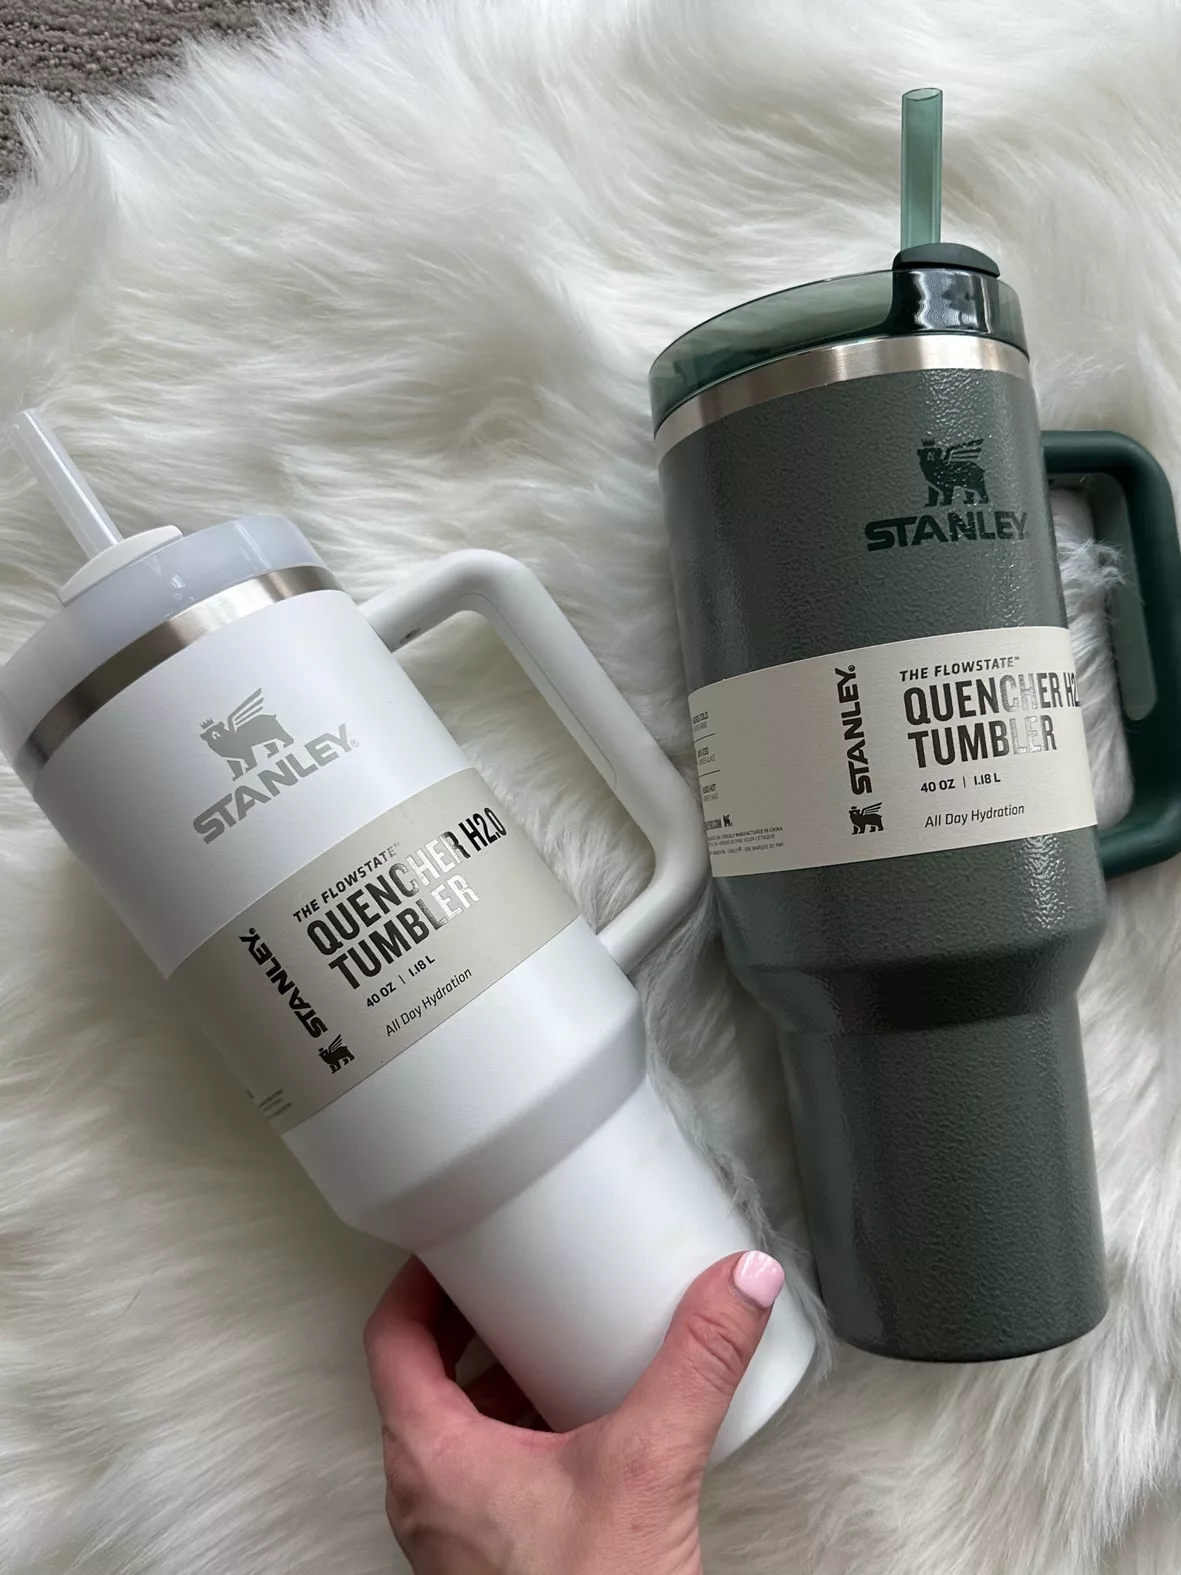 These 4 new Stanley tumblers and bottles make the perfect gifts